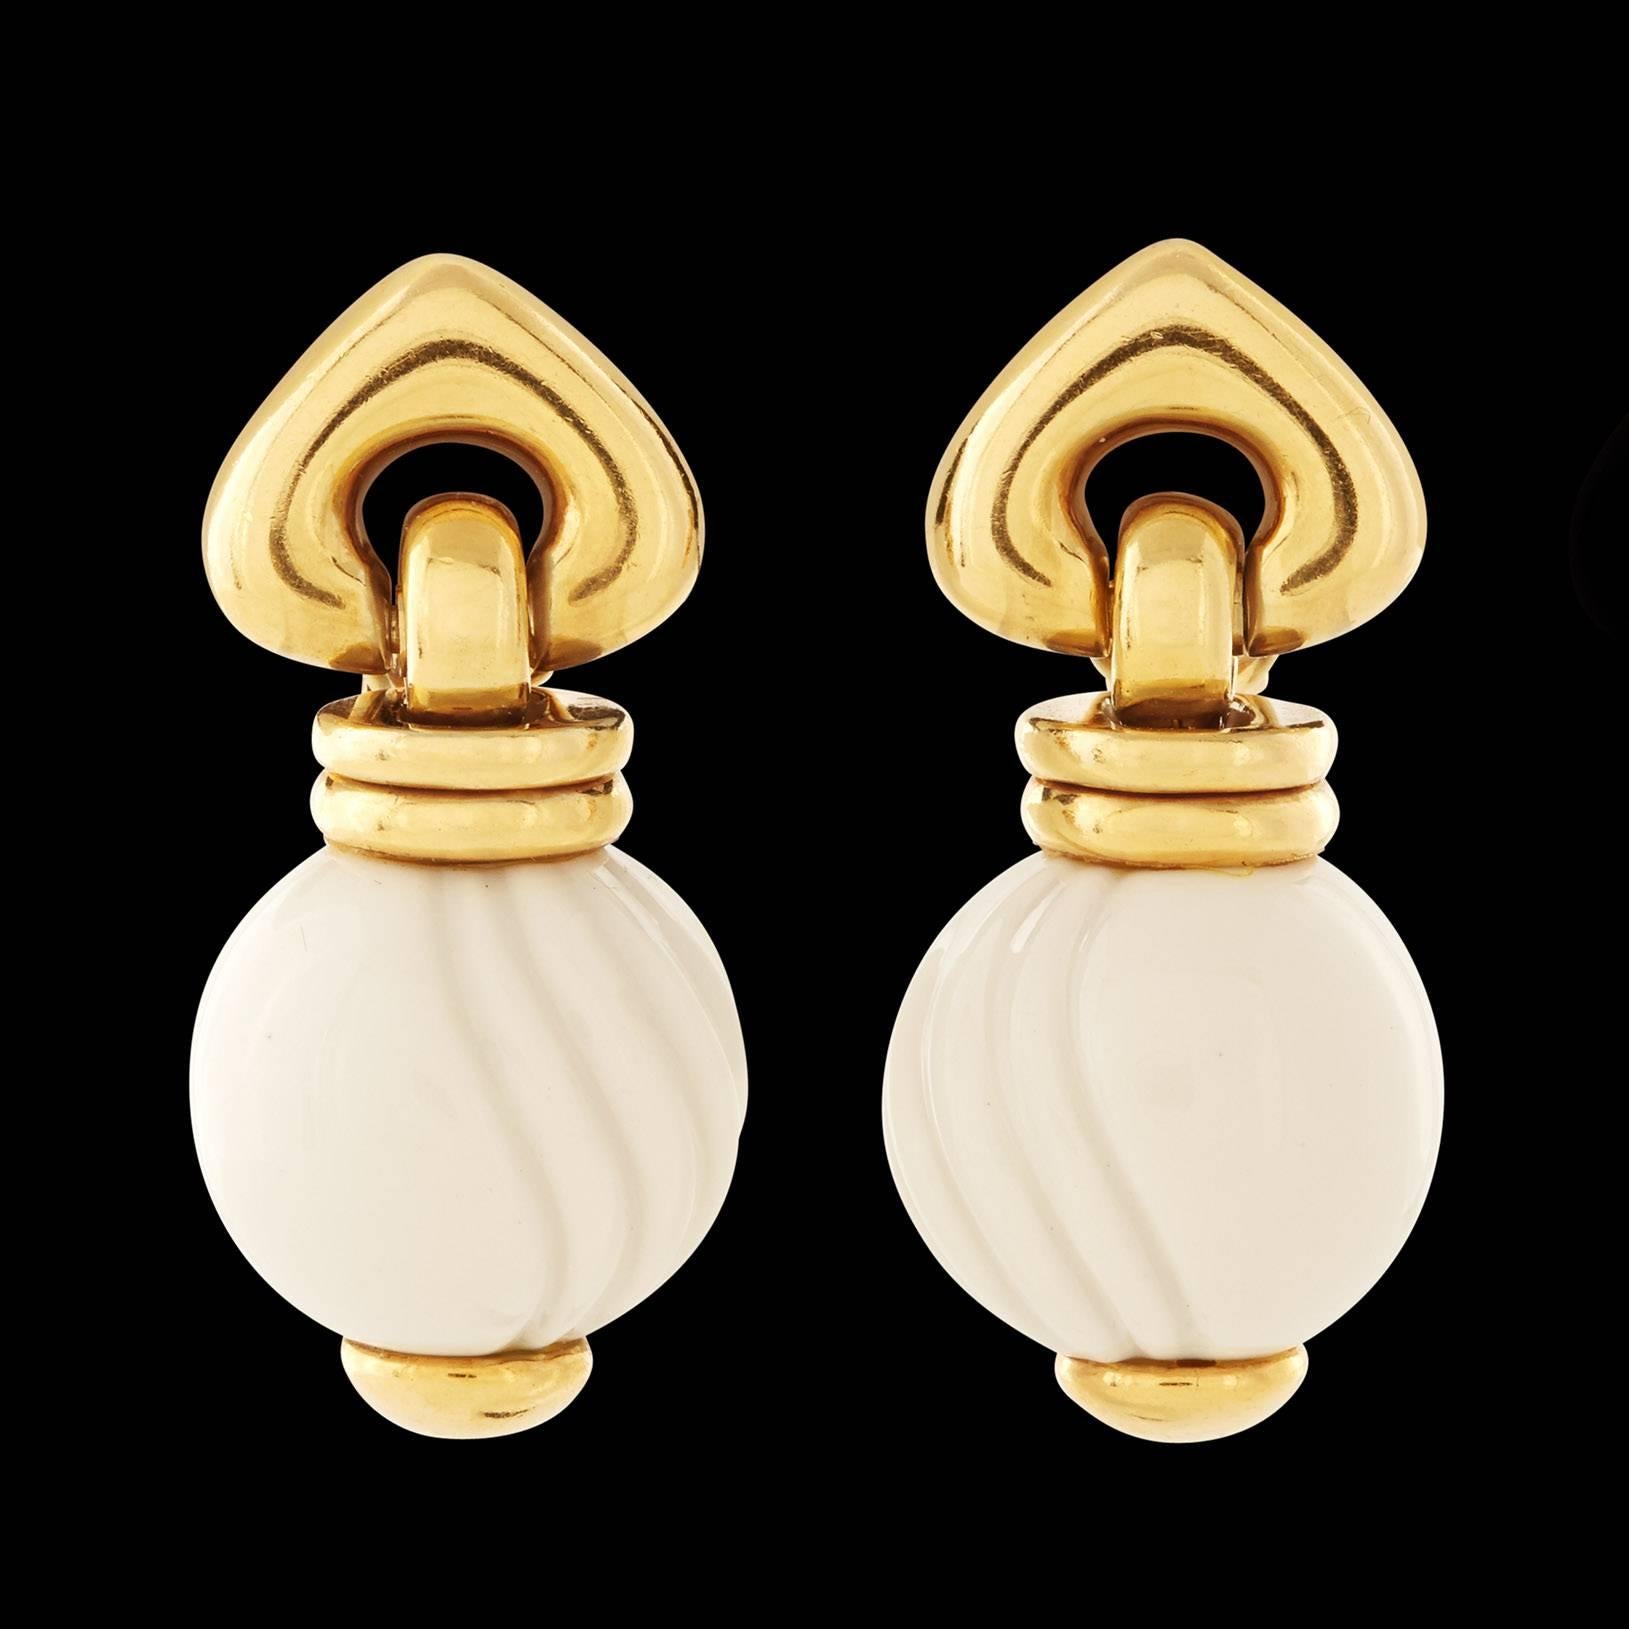 Bulgari 18Kt Yellow Gold & Porcelain Bead Drop Earrings from the Chandra Collection. The earrings measure approximately 1.5 inches long and the porcelain bead measures 16.5mm in diameter. Total weight of the pair is 27 grams.